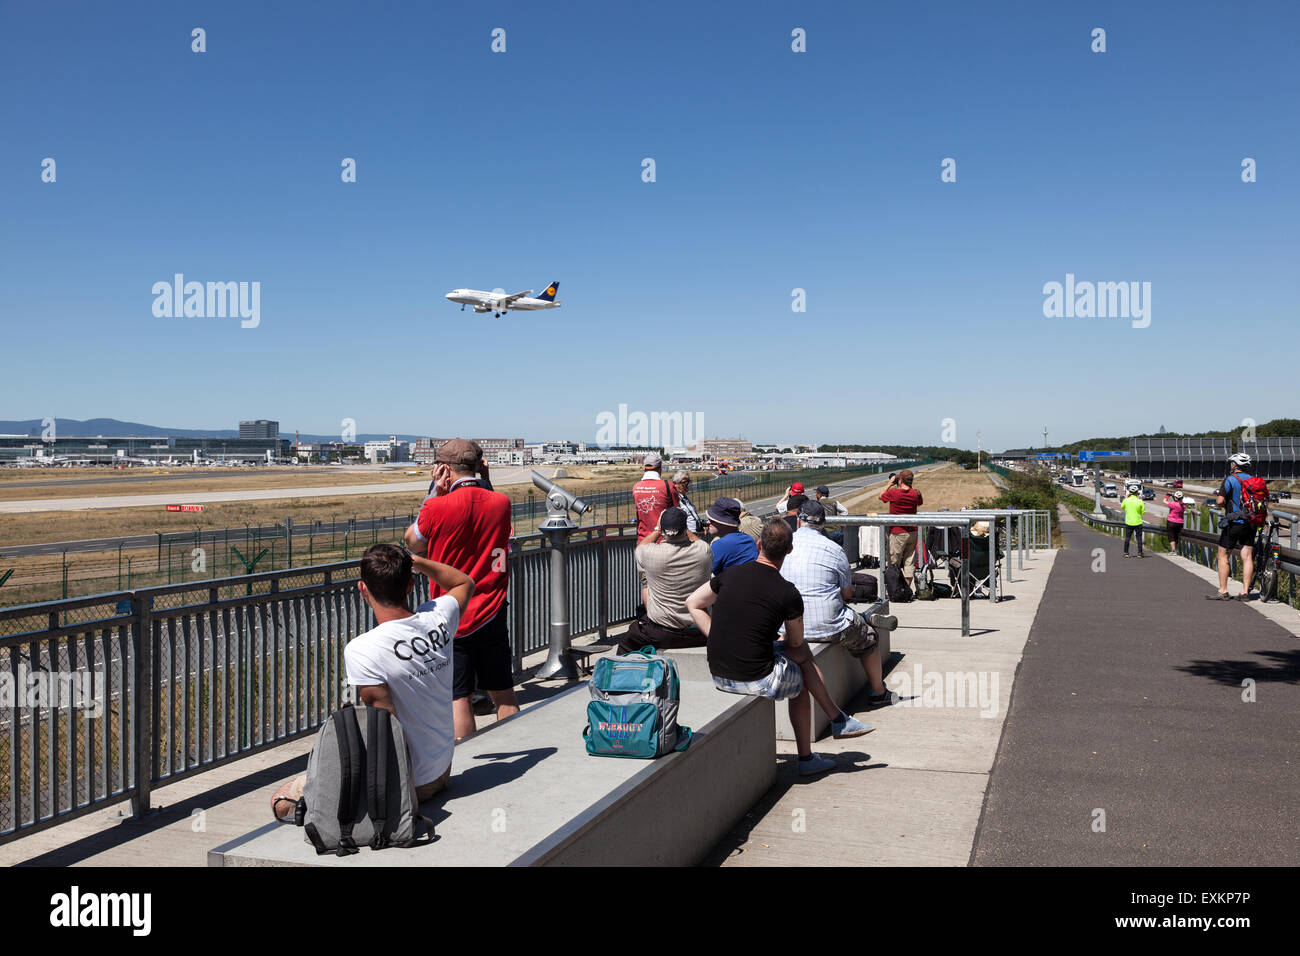 Aircraft spotting point for the tourists at the international airport in Frankfurt. July 10, 2015 in Frankfurt Main, Germany Stock Photo